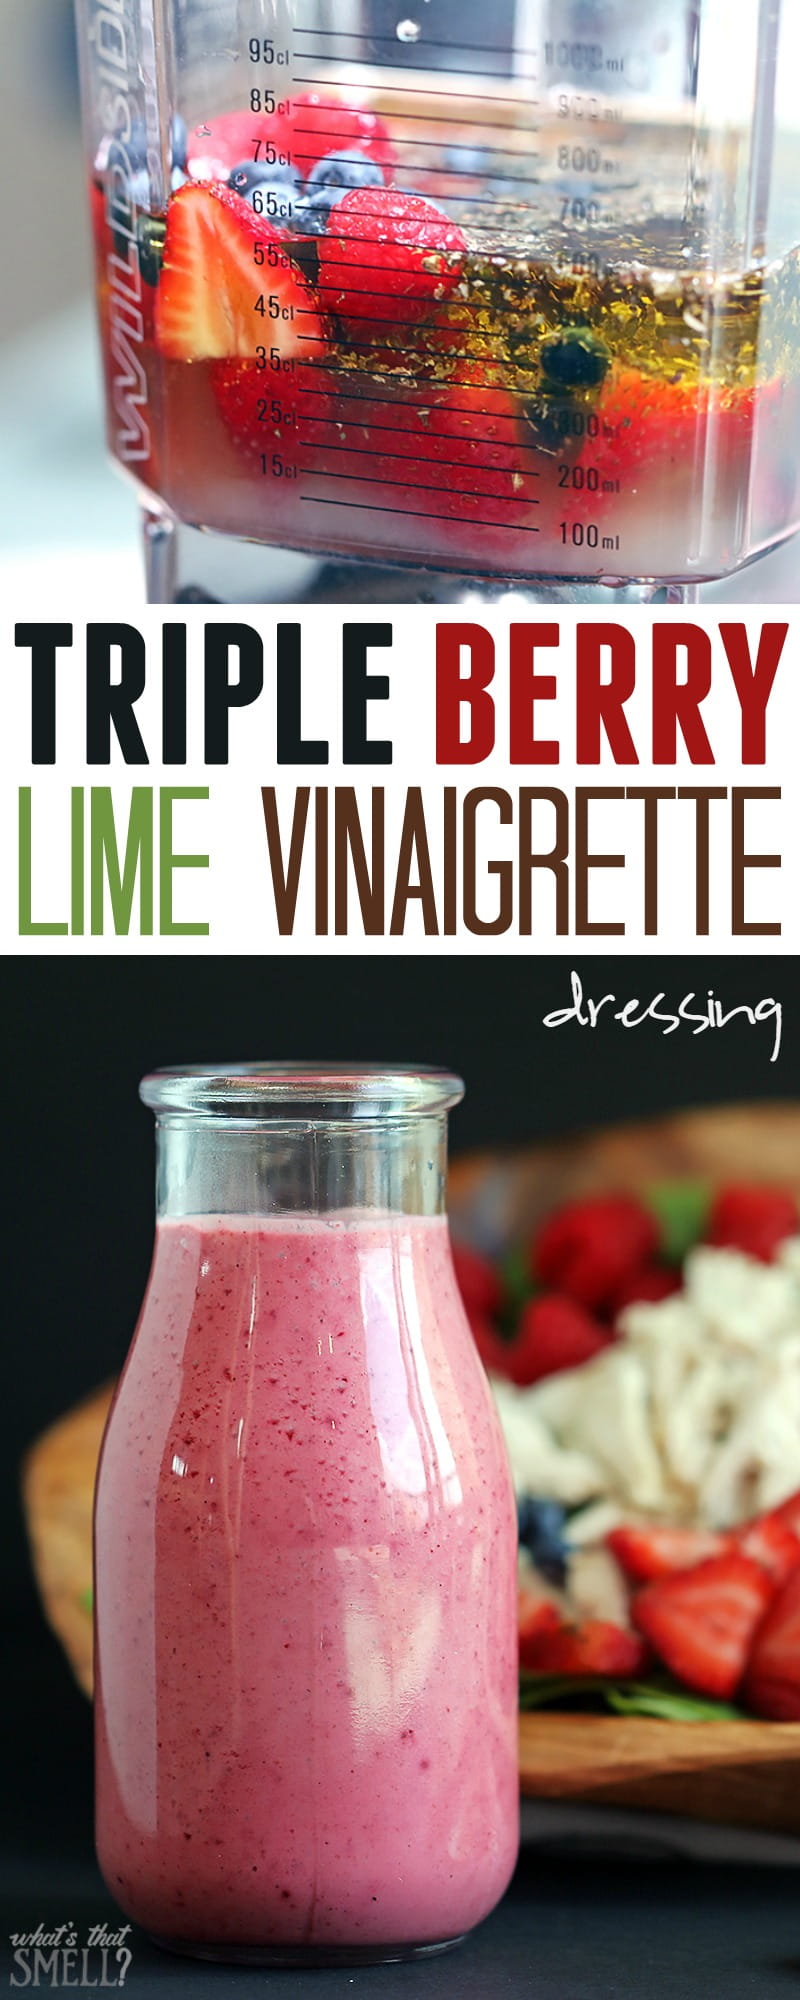 Triple berry lime vinaigrette dressing - fresh strawberries, raspberries & blueberries combine with a touch of lime in this sweet yet tart vinaigrette dressing. Perfect summer dressing!